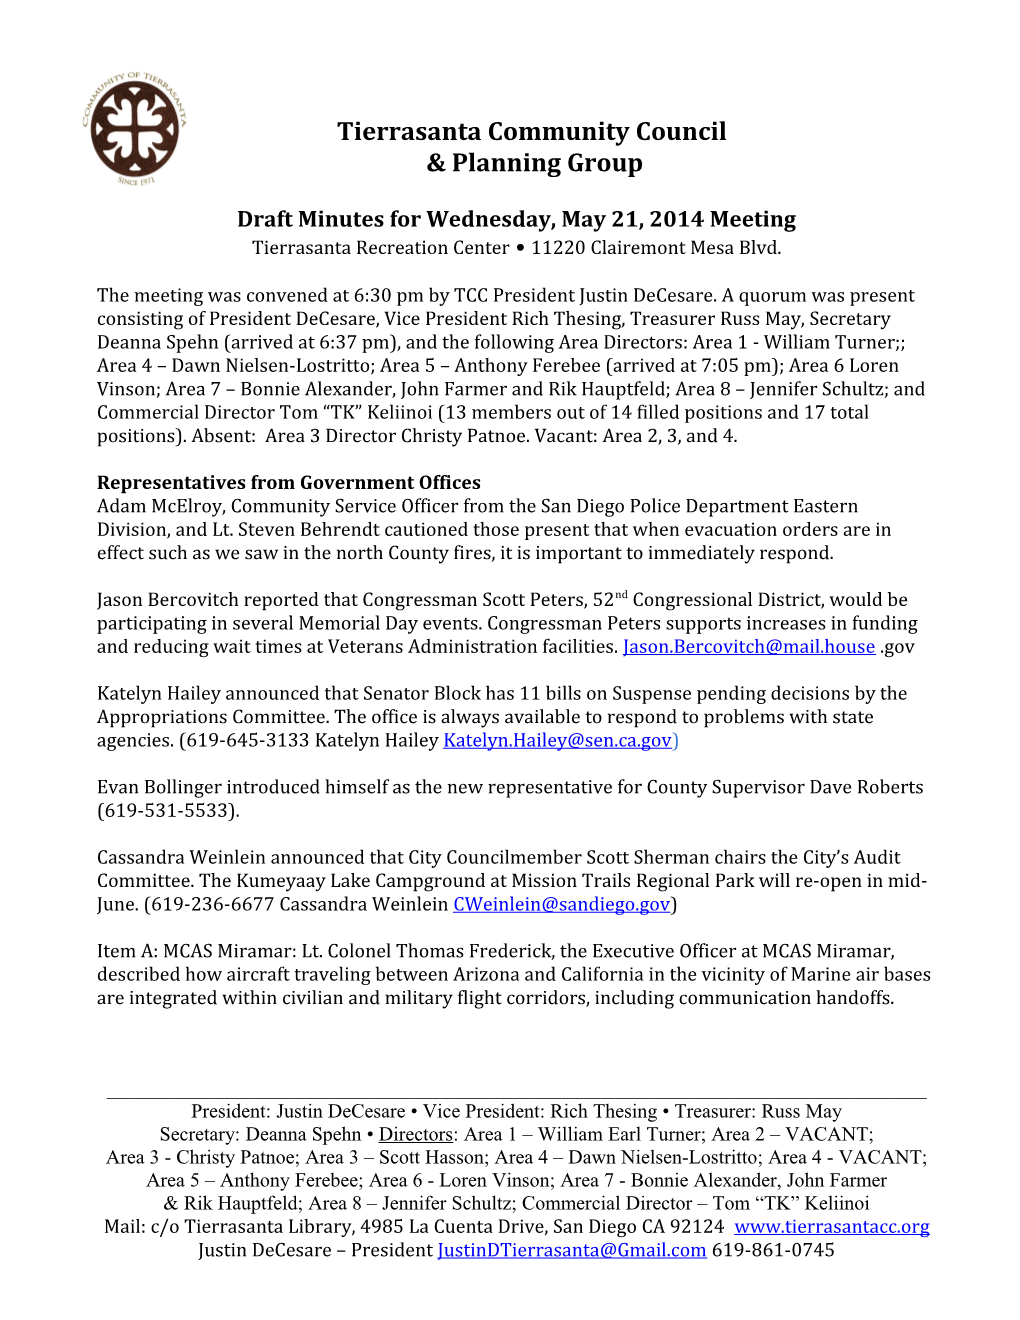 Draft Minutes Forwednesday, May 21, 2014 Meeting